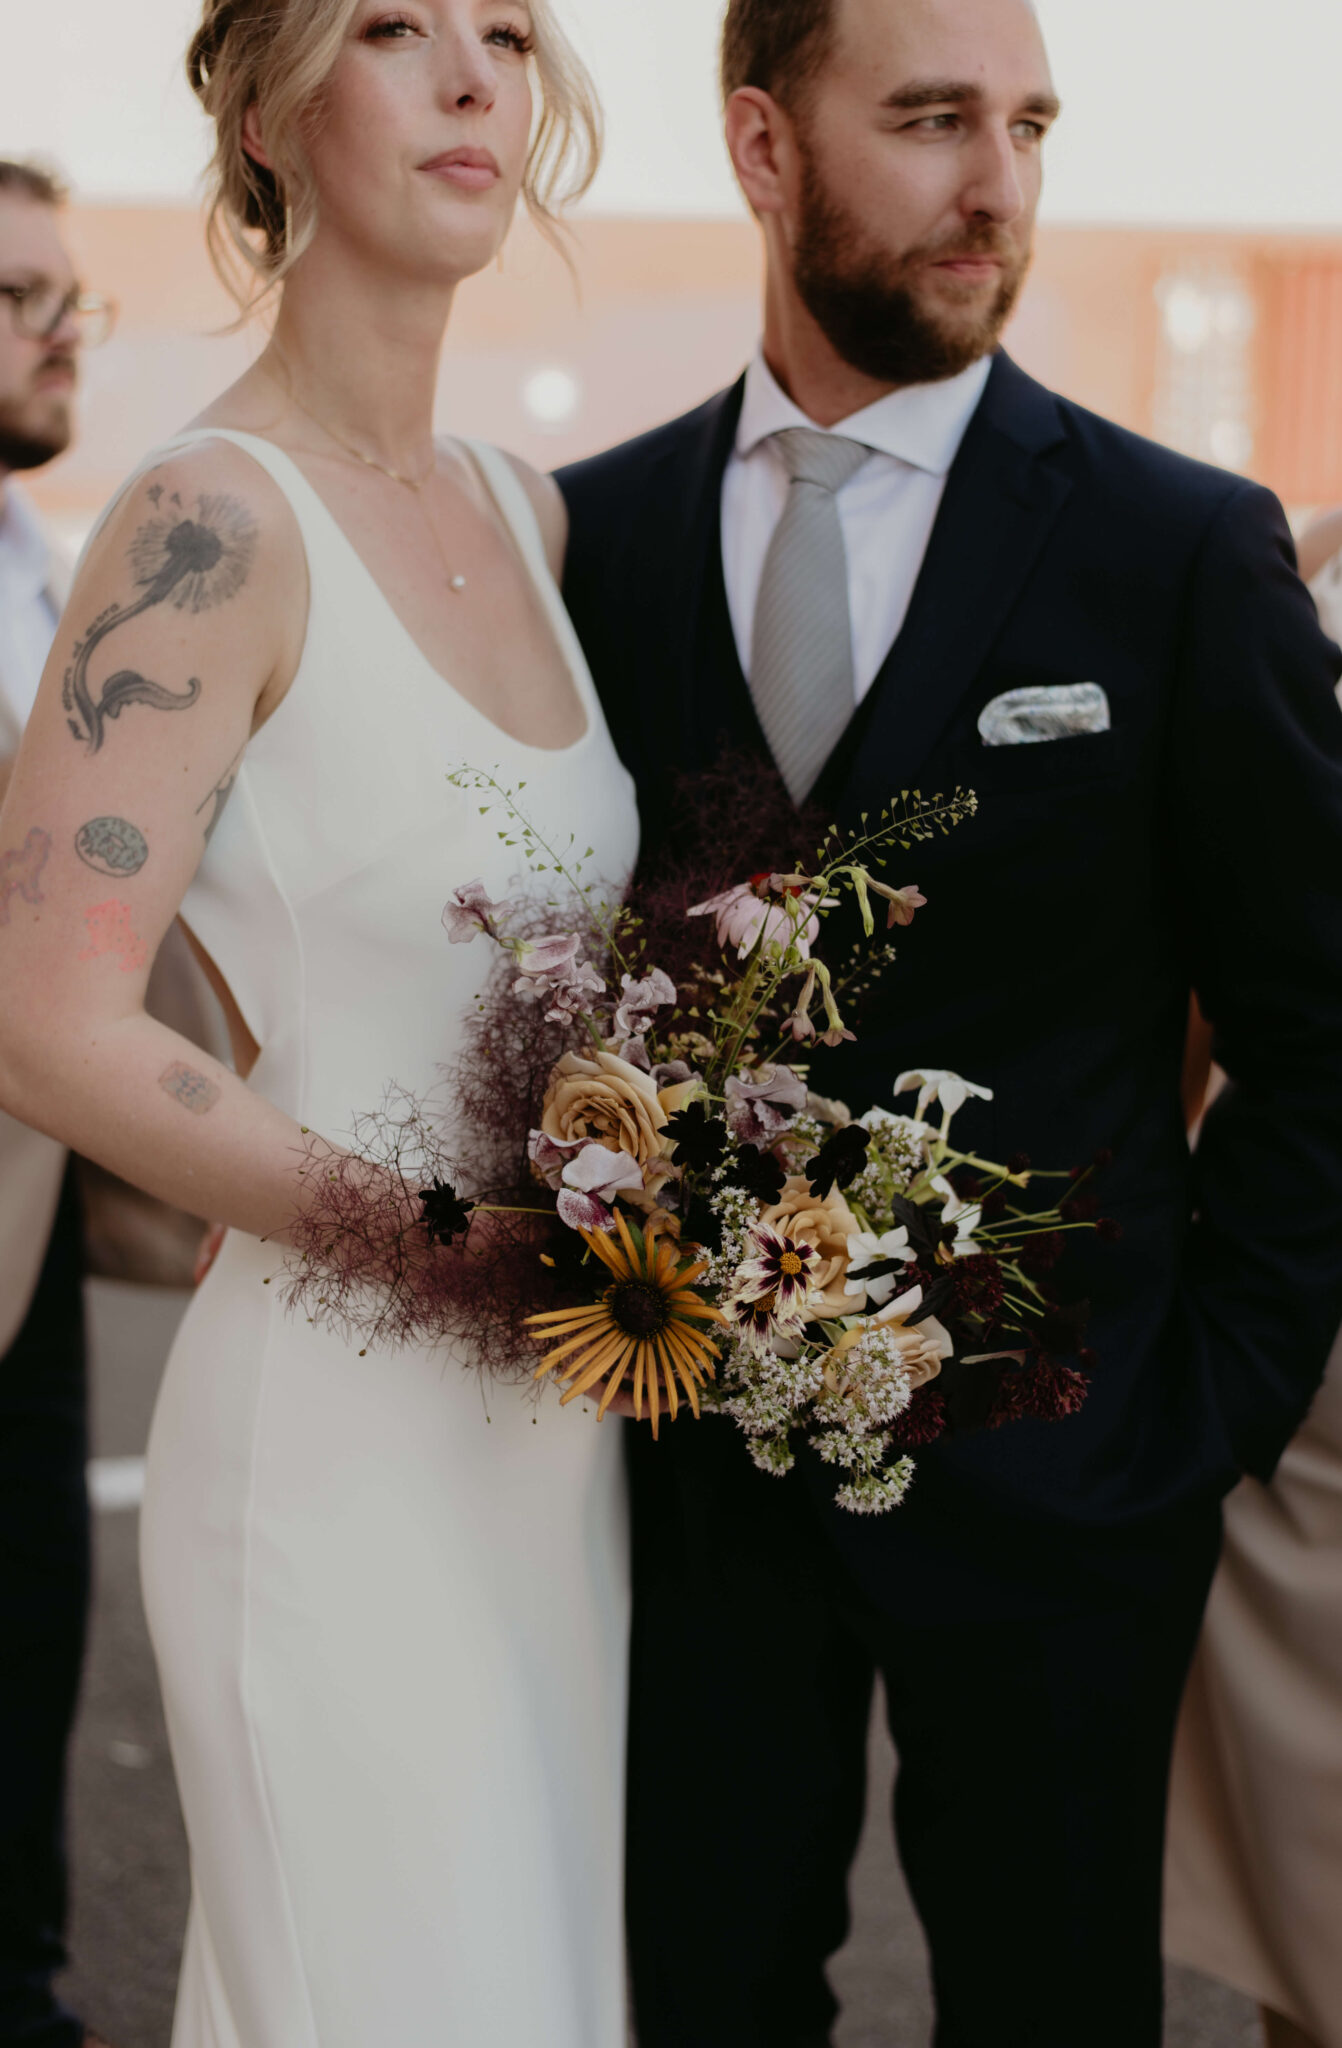 Modern, textural and organic flowers for an urban Seattle wedding at the Metropolist